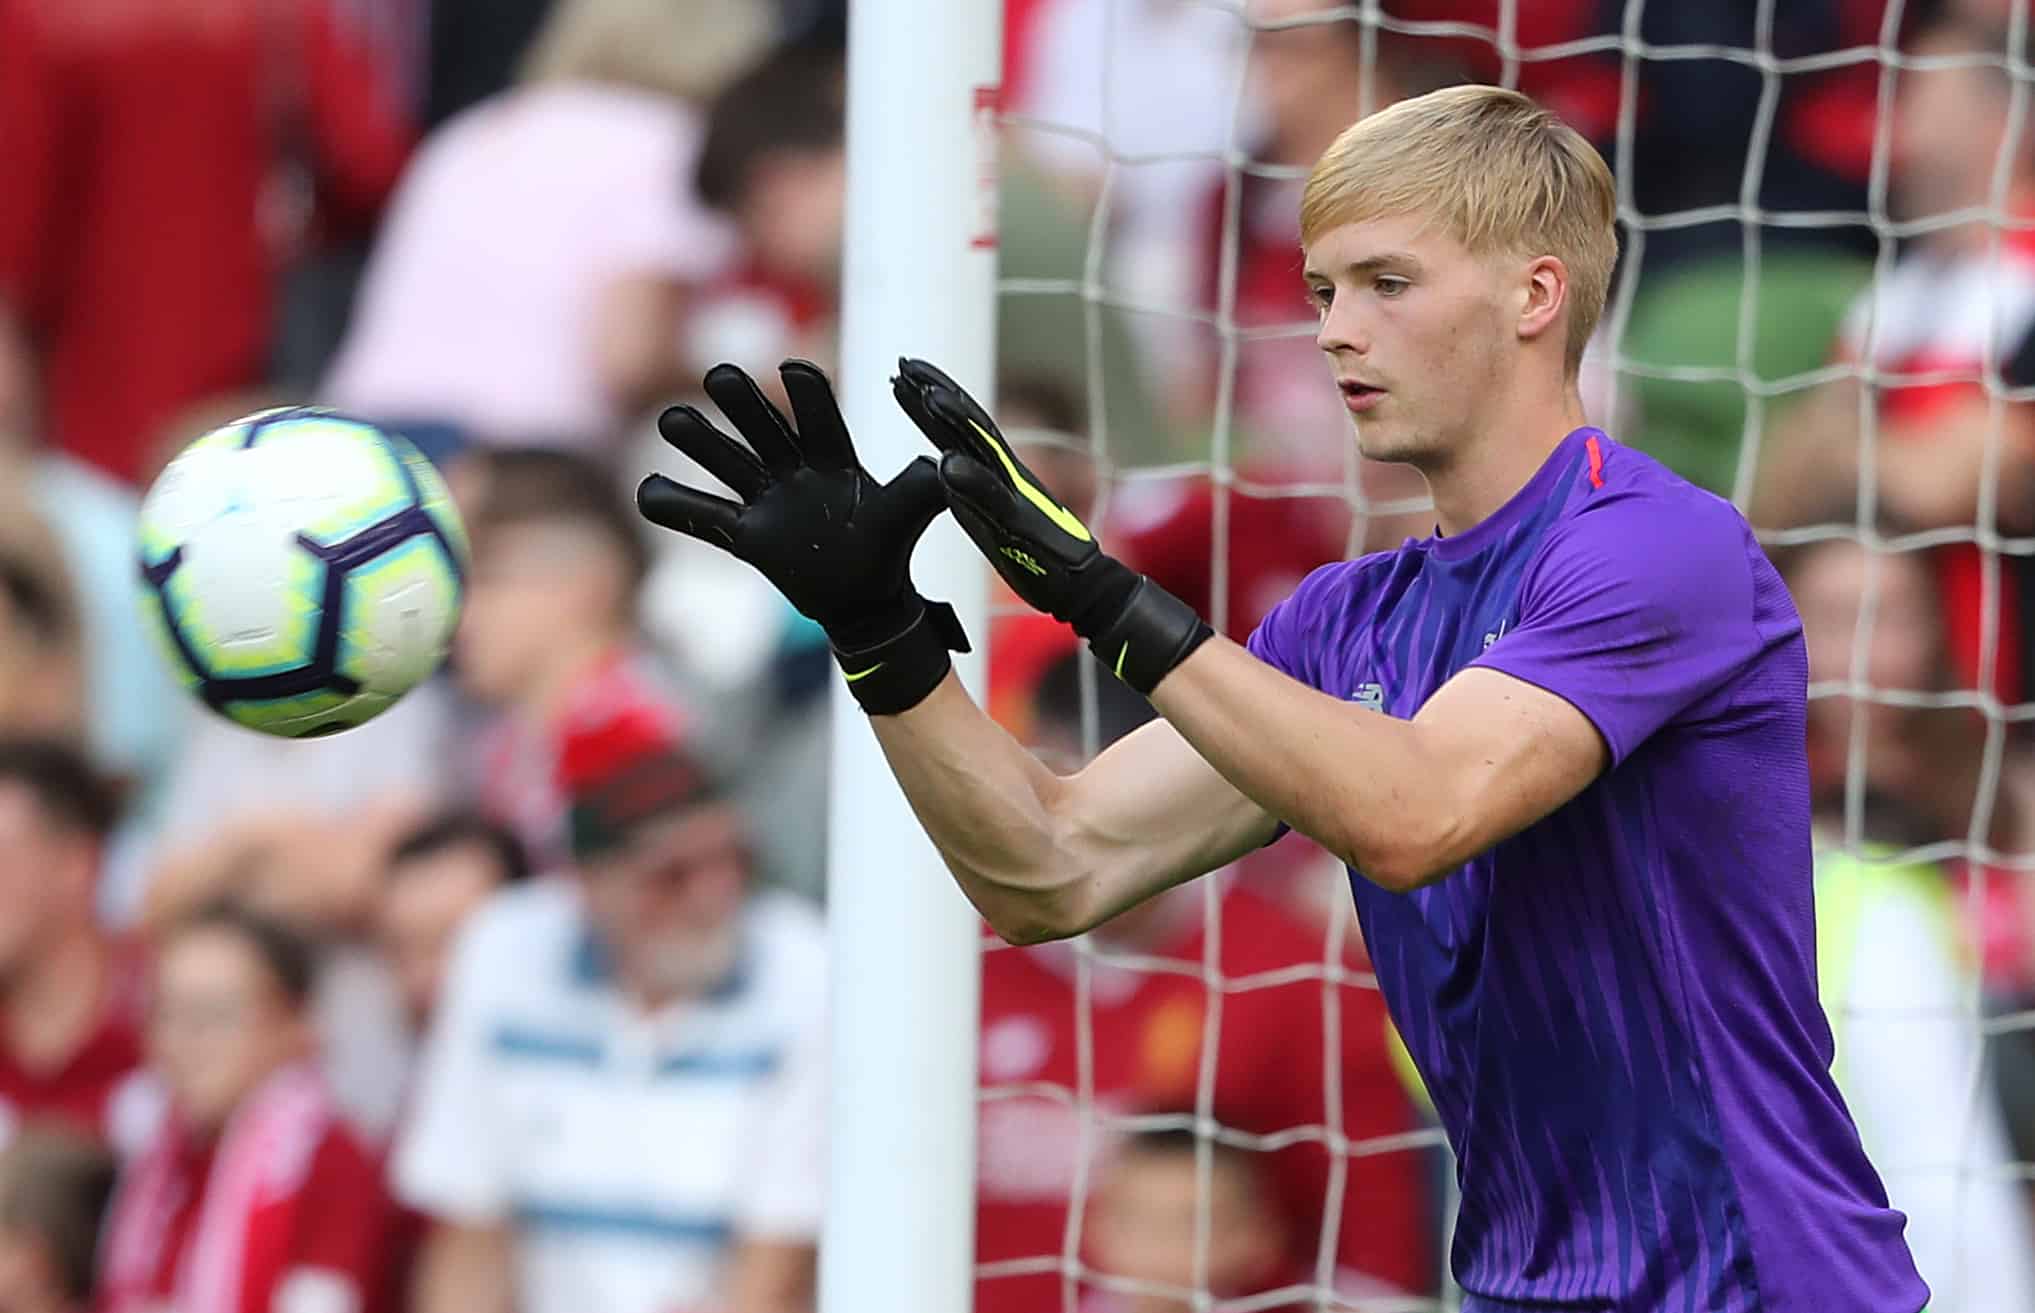 ‘Progressing really well at Liverpool’ – U21s boss on keeper as striker ‘wouldn’t betray Liverpool’ by moving to Man Utd